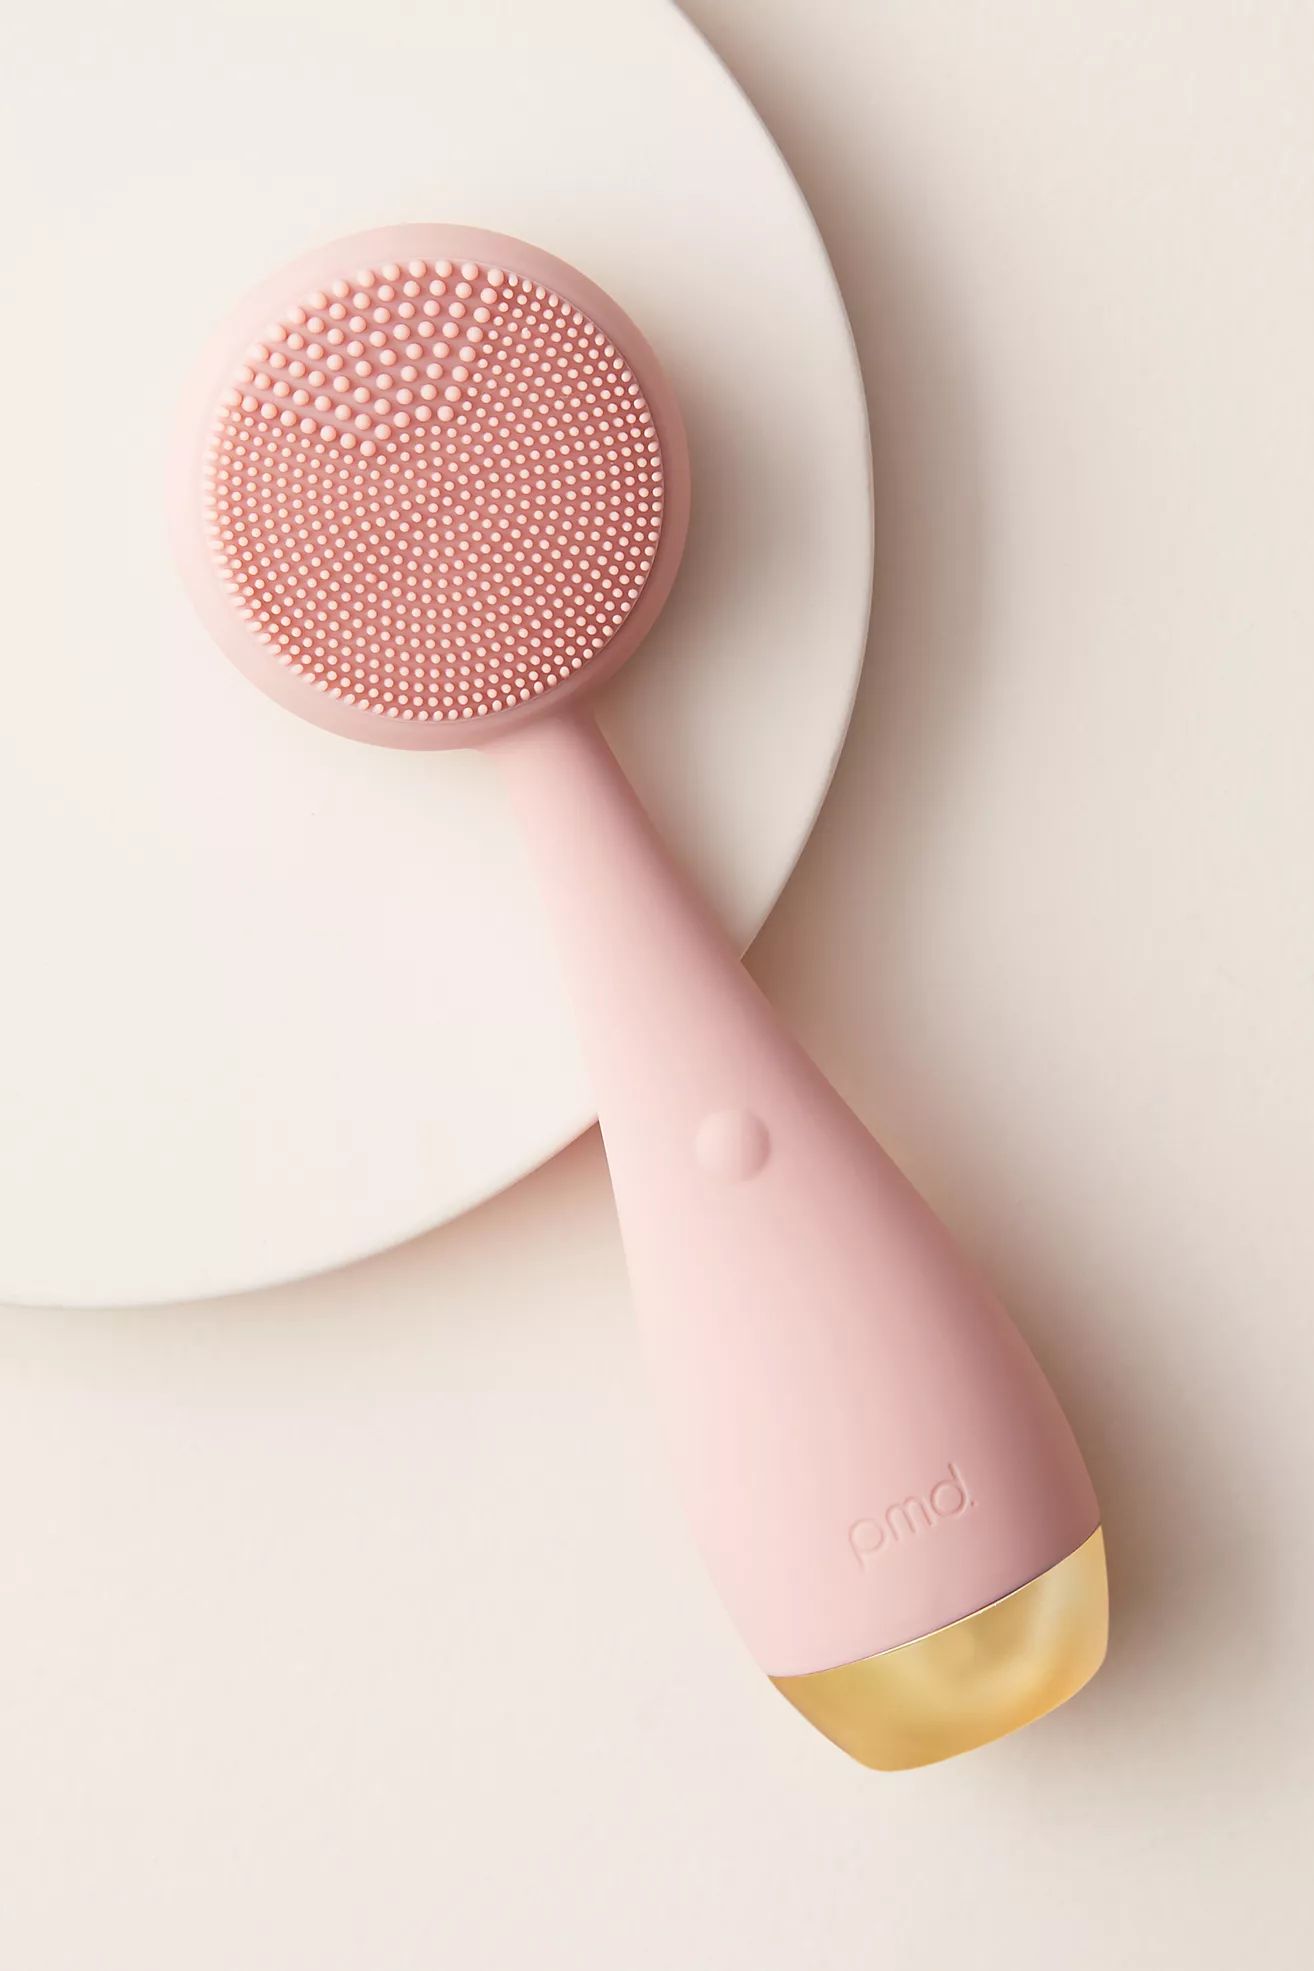 PMD Clean Pro Gold Smart Facial Cleansing Device | Anthropologie (US)